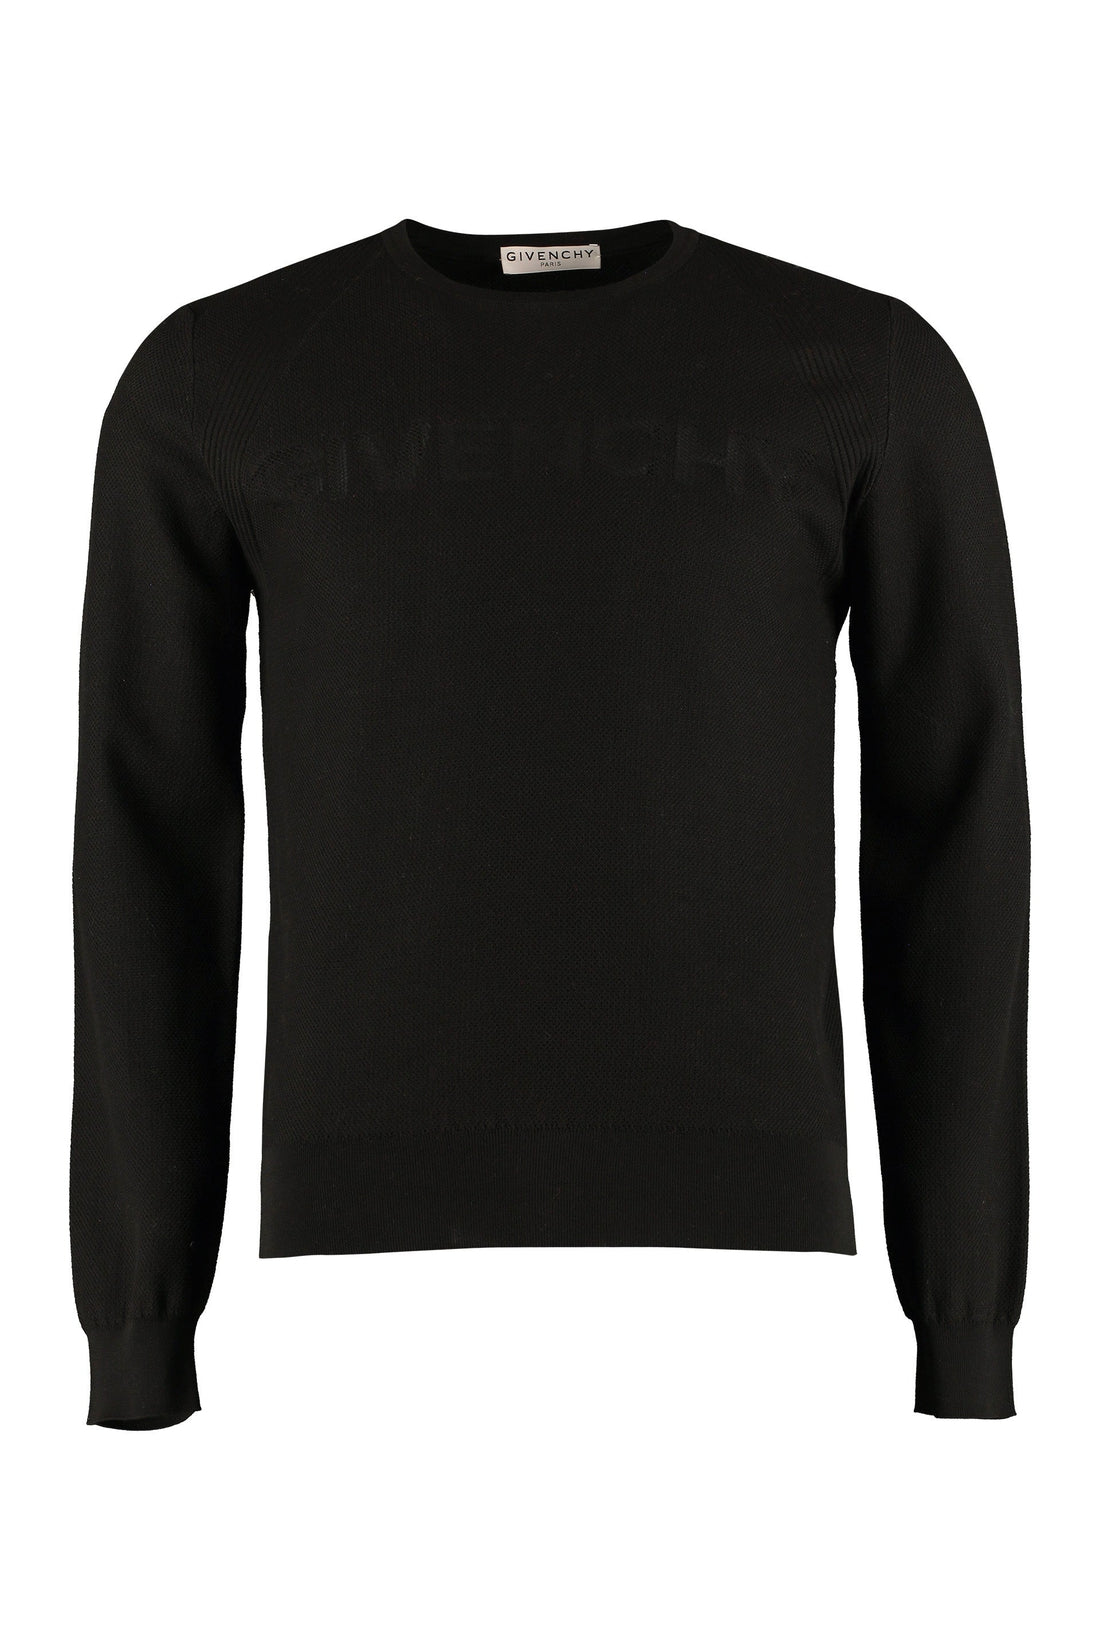 Givenchy-OUTLET-SALE-Long-sleeved cotton sweater-ARCHIVIST